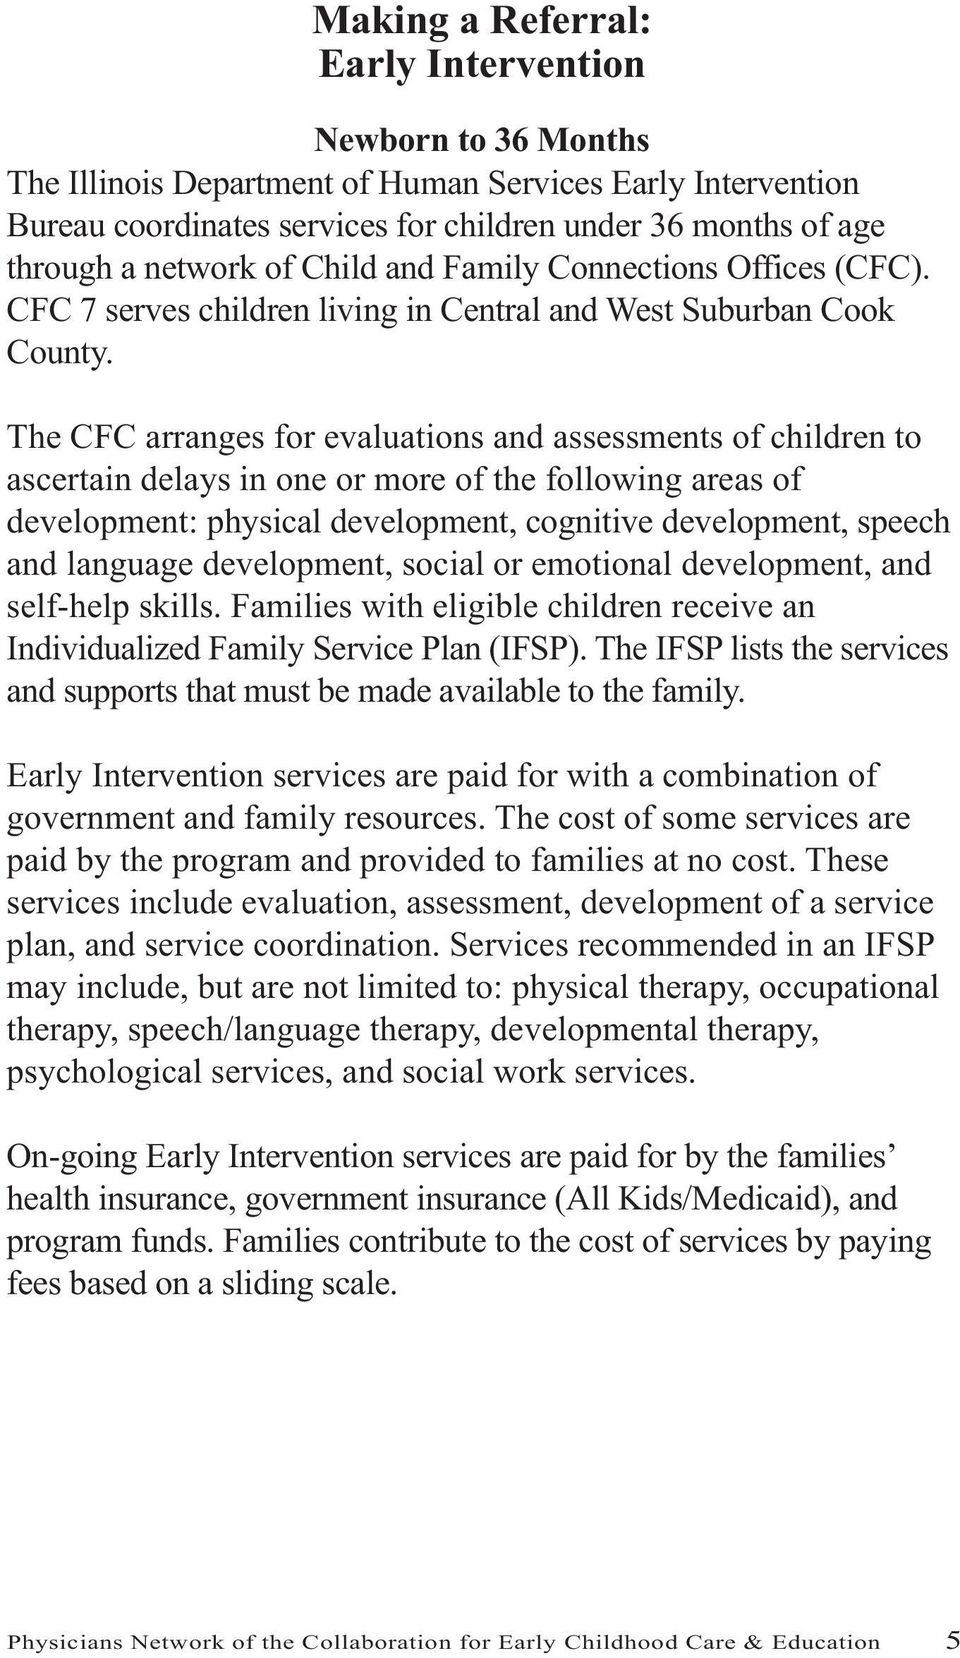 The CFC arranges for evaluations and assessments of children to ascertain delays in one or more of the following areas of development: physical development, cognitive development, speech and language